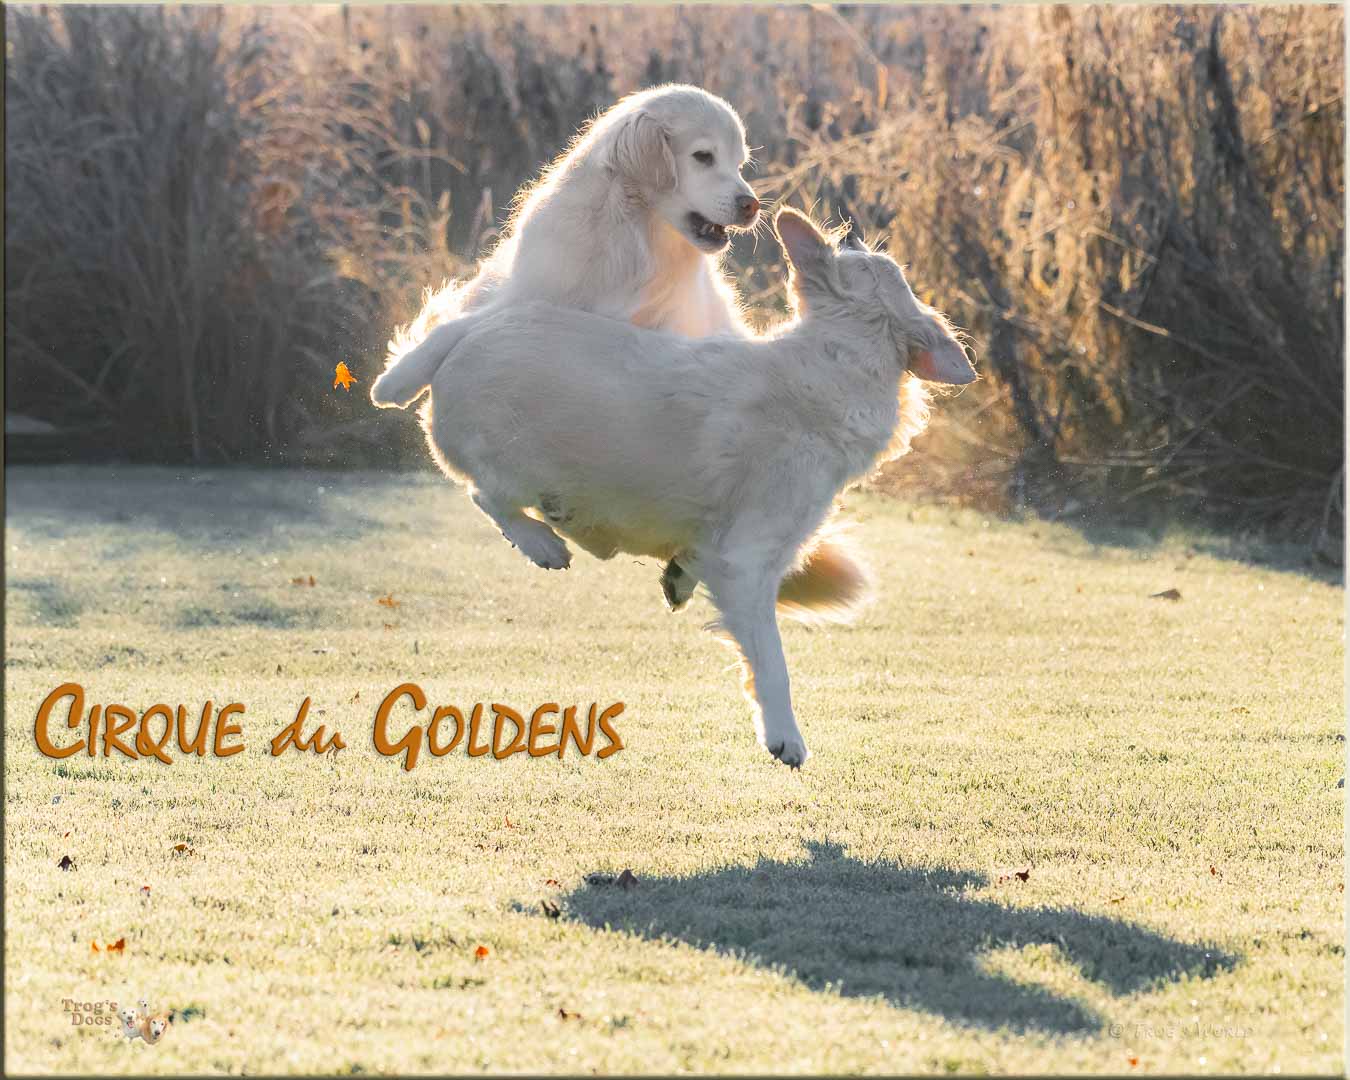 Two Goldens jumping in the air